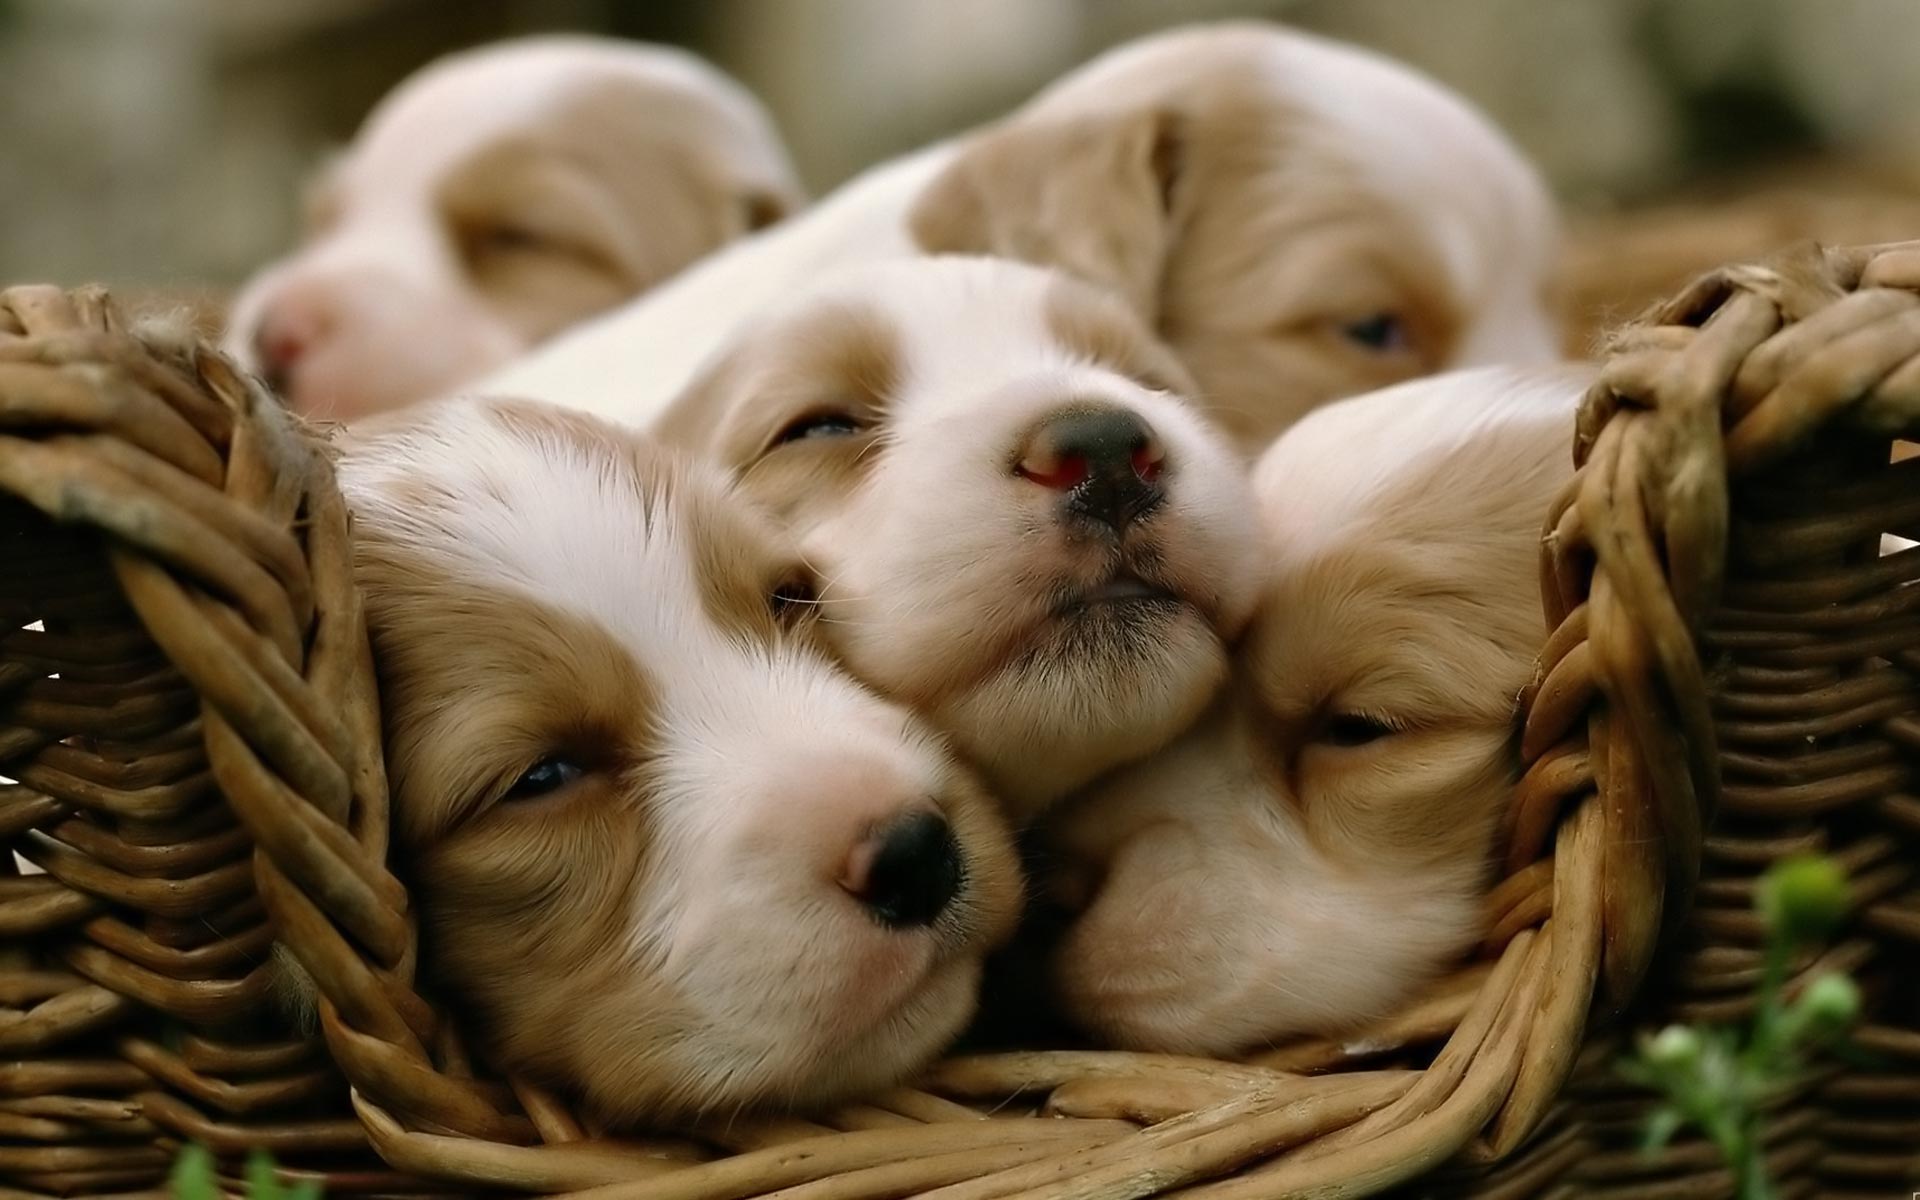  Cute  Puppy  Wallpapers  Those Are Perfect To Make Your Mood  